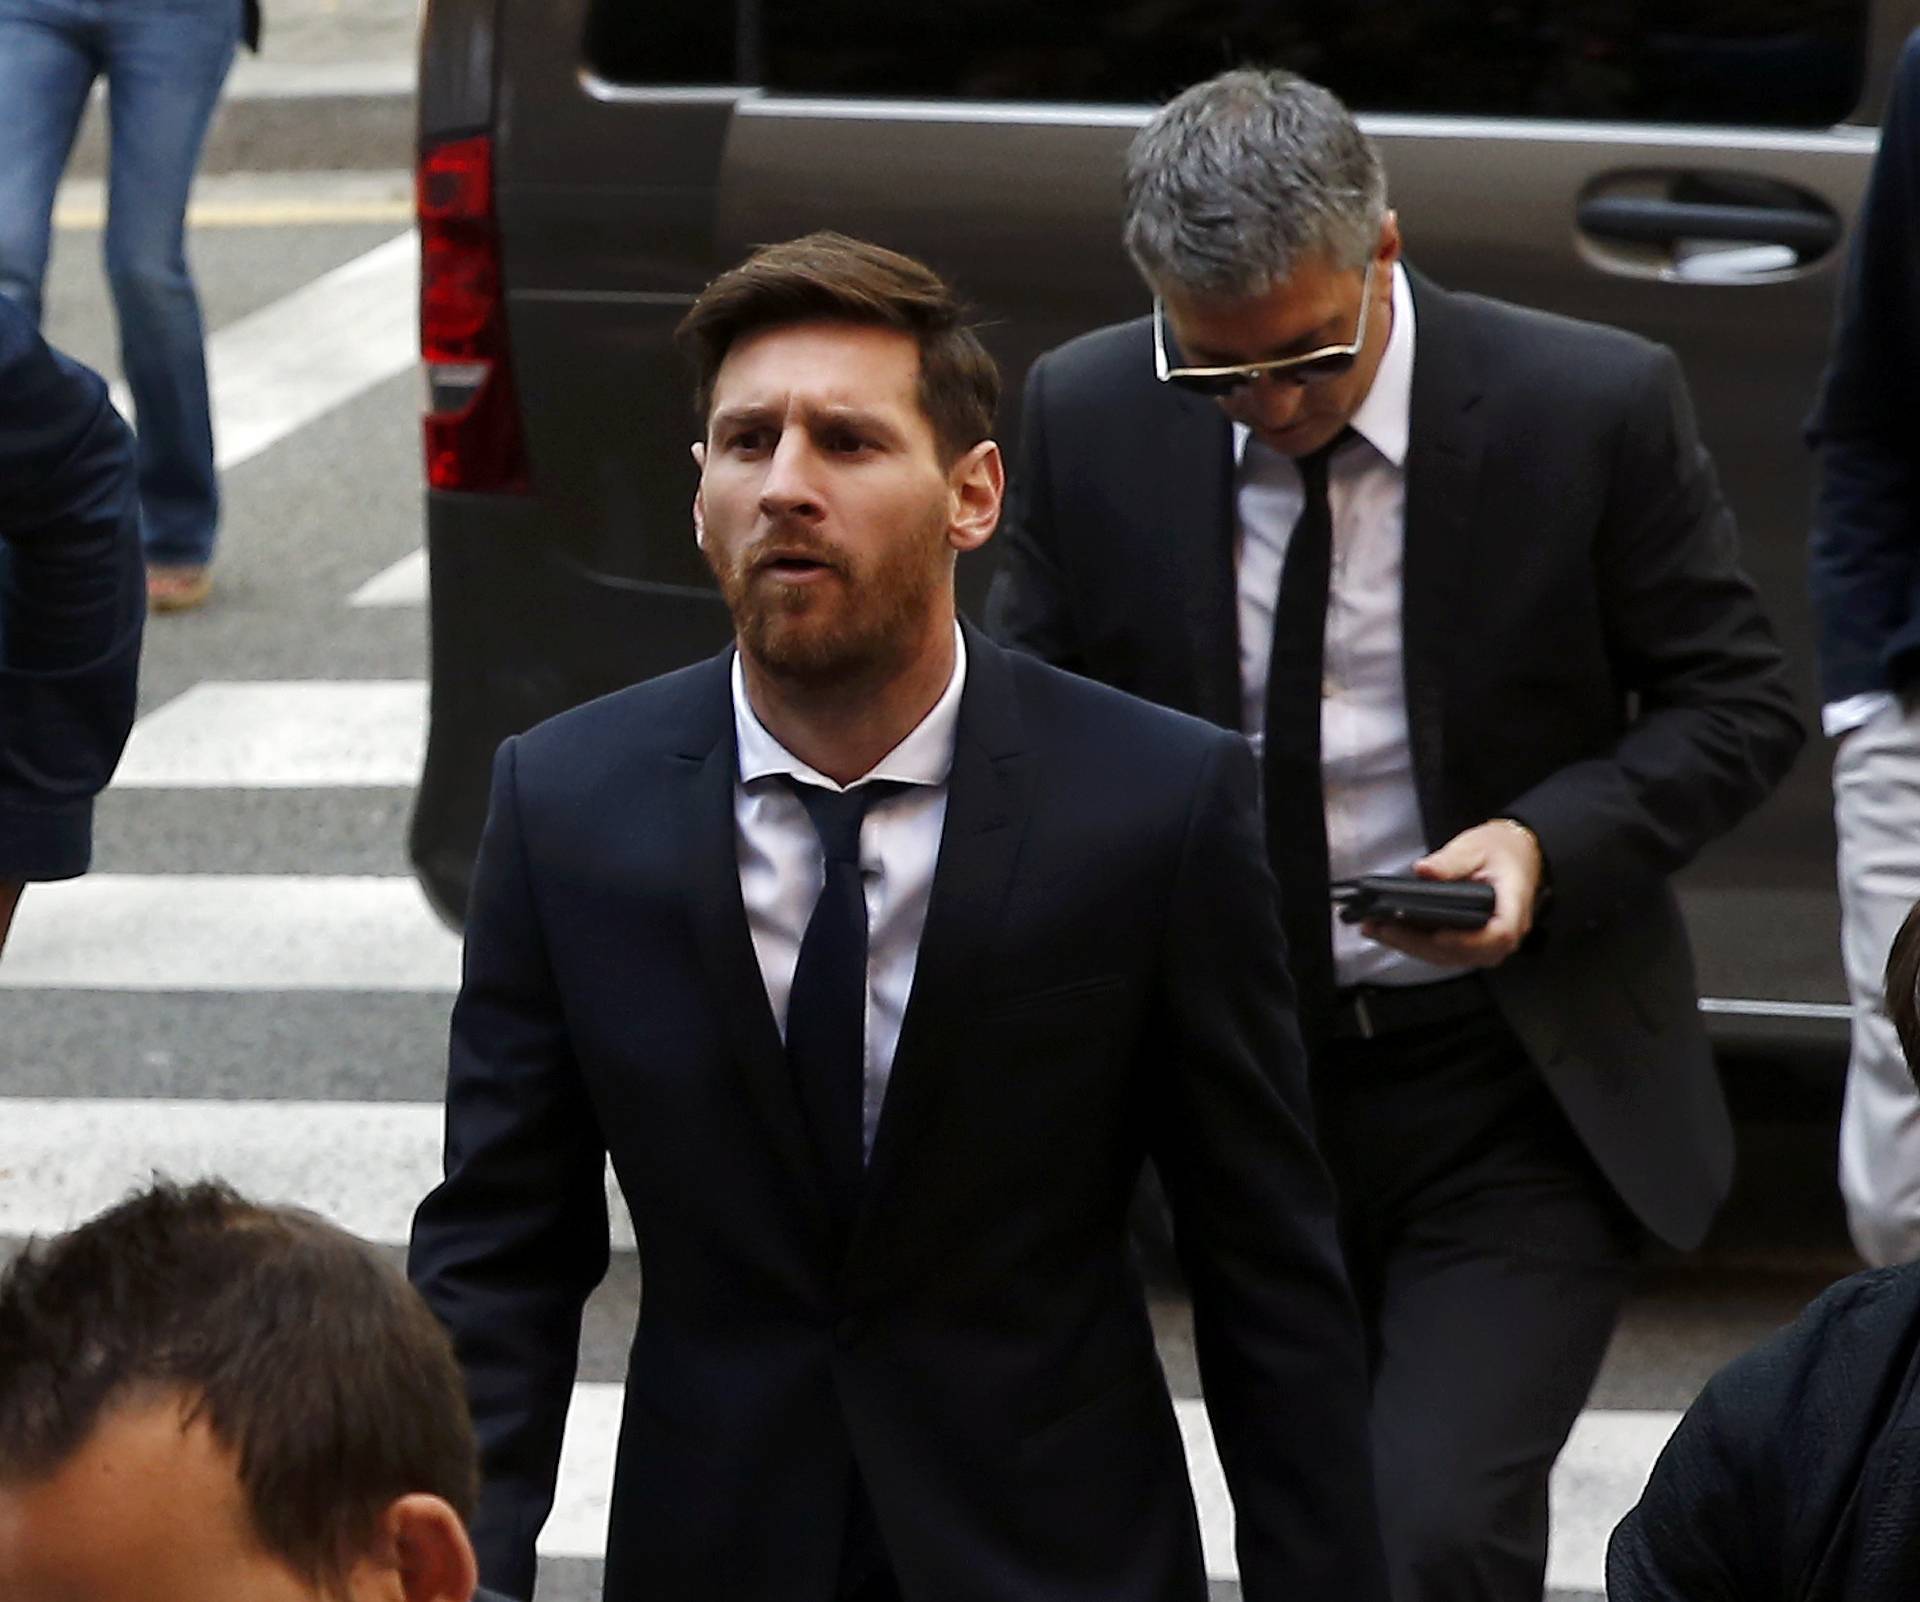 Barcelona's Argentine soccer player Lionel Messi arrives to court with his father Jorge Horacio Messi to stand trial for tax fraud in Barcelona